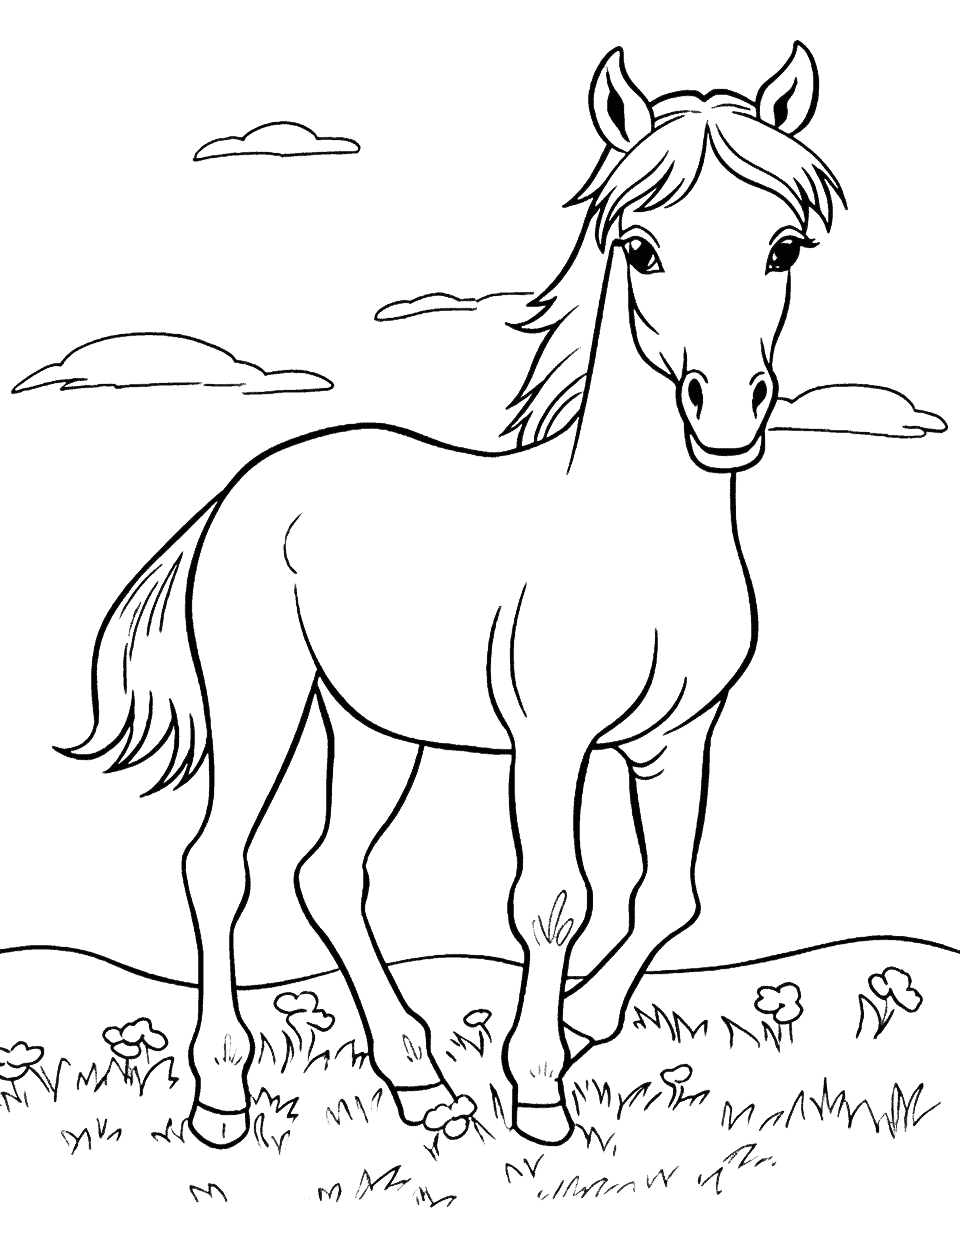 Cute Baby Foal Horse Coloring Page - A cute and easy-to-color picture of a baby foal playing in a field.